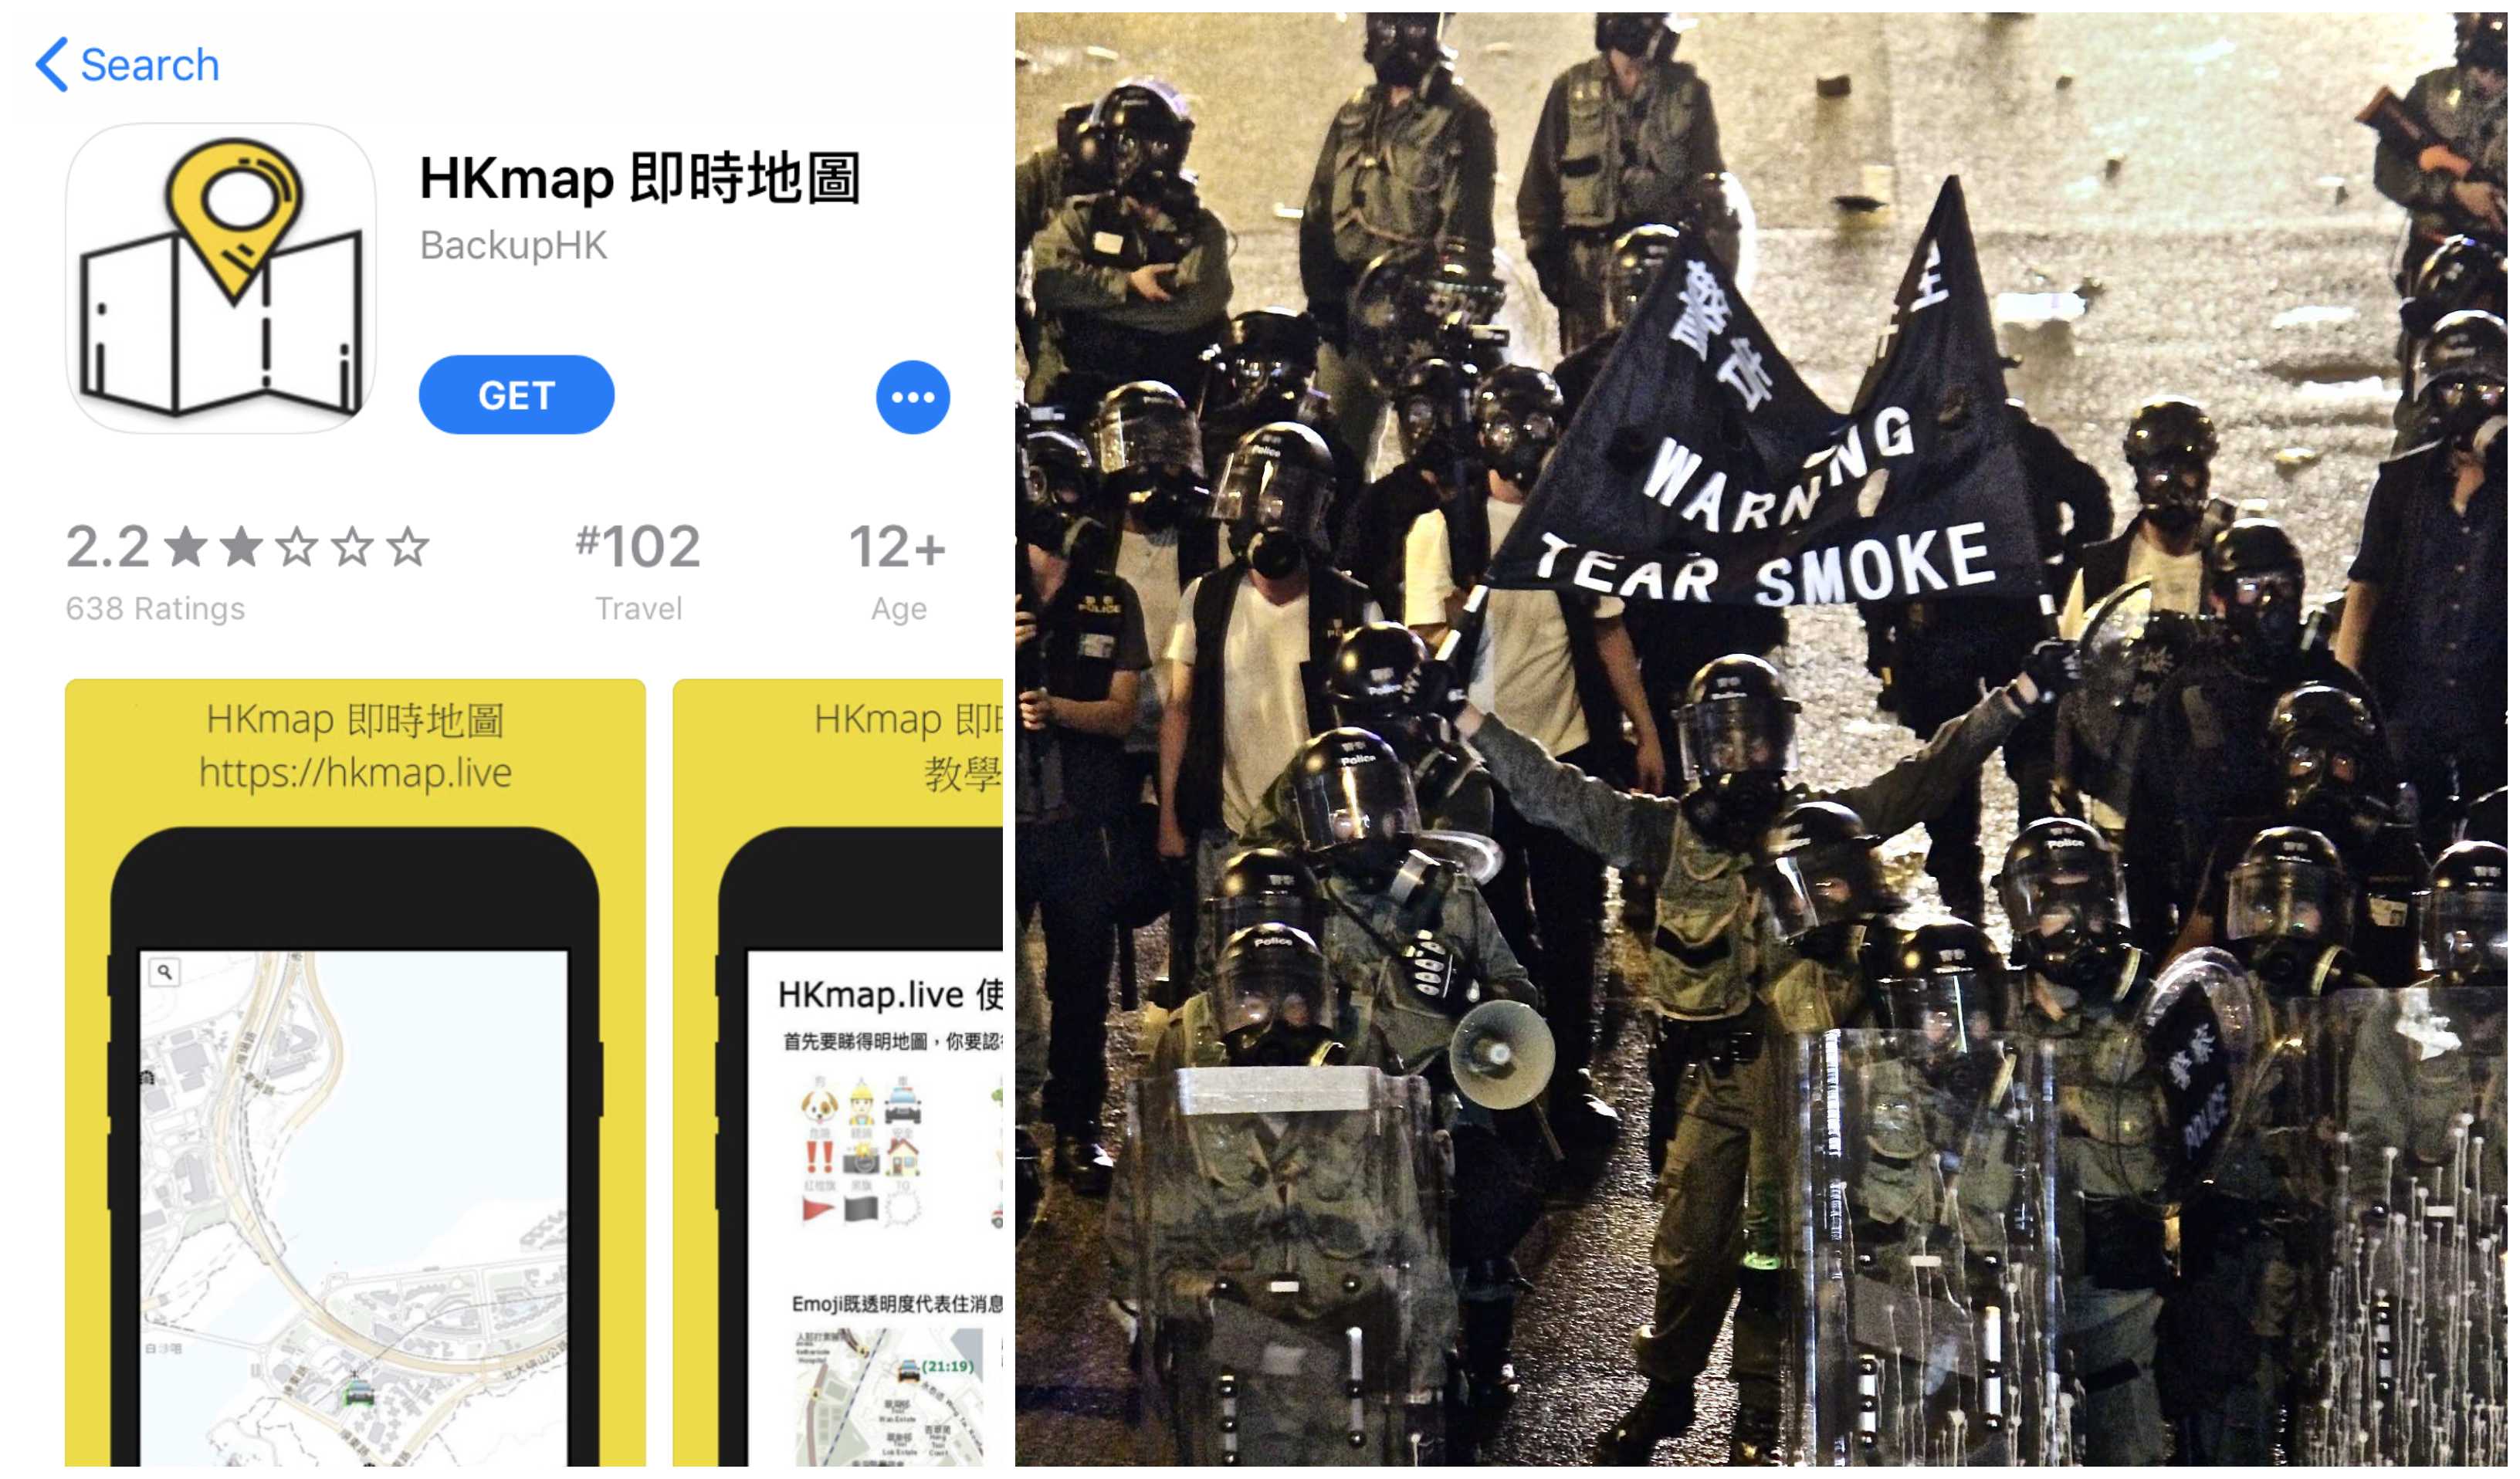 the HKmap.live app (left), listed in Apple’s Store, allows users to crowdsource the location of police and violent incidents related to Hong Kong’s ongoing protest movement. Photo (right) by Vicky Wong.